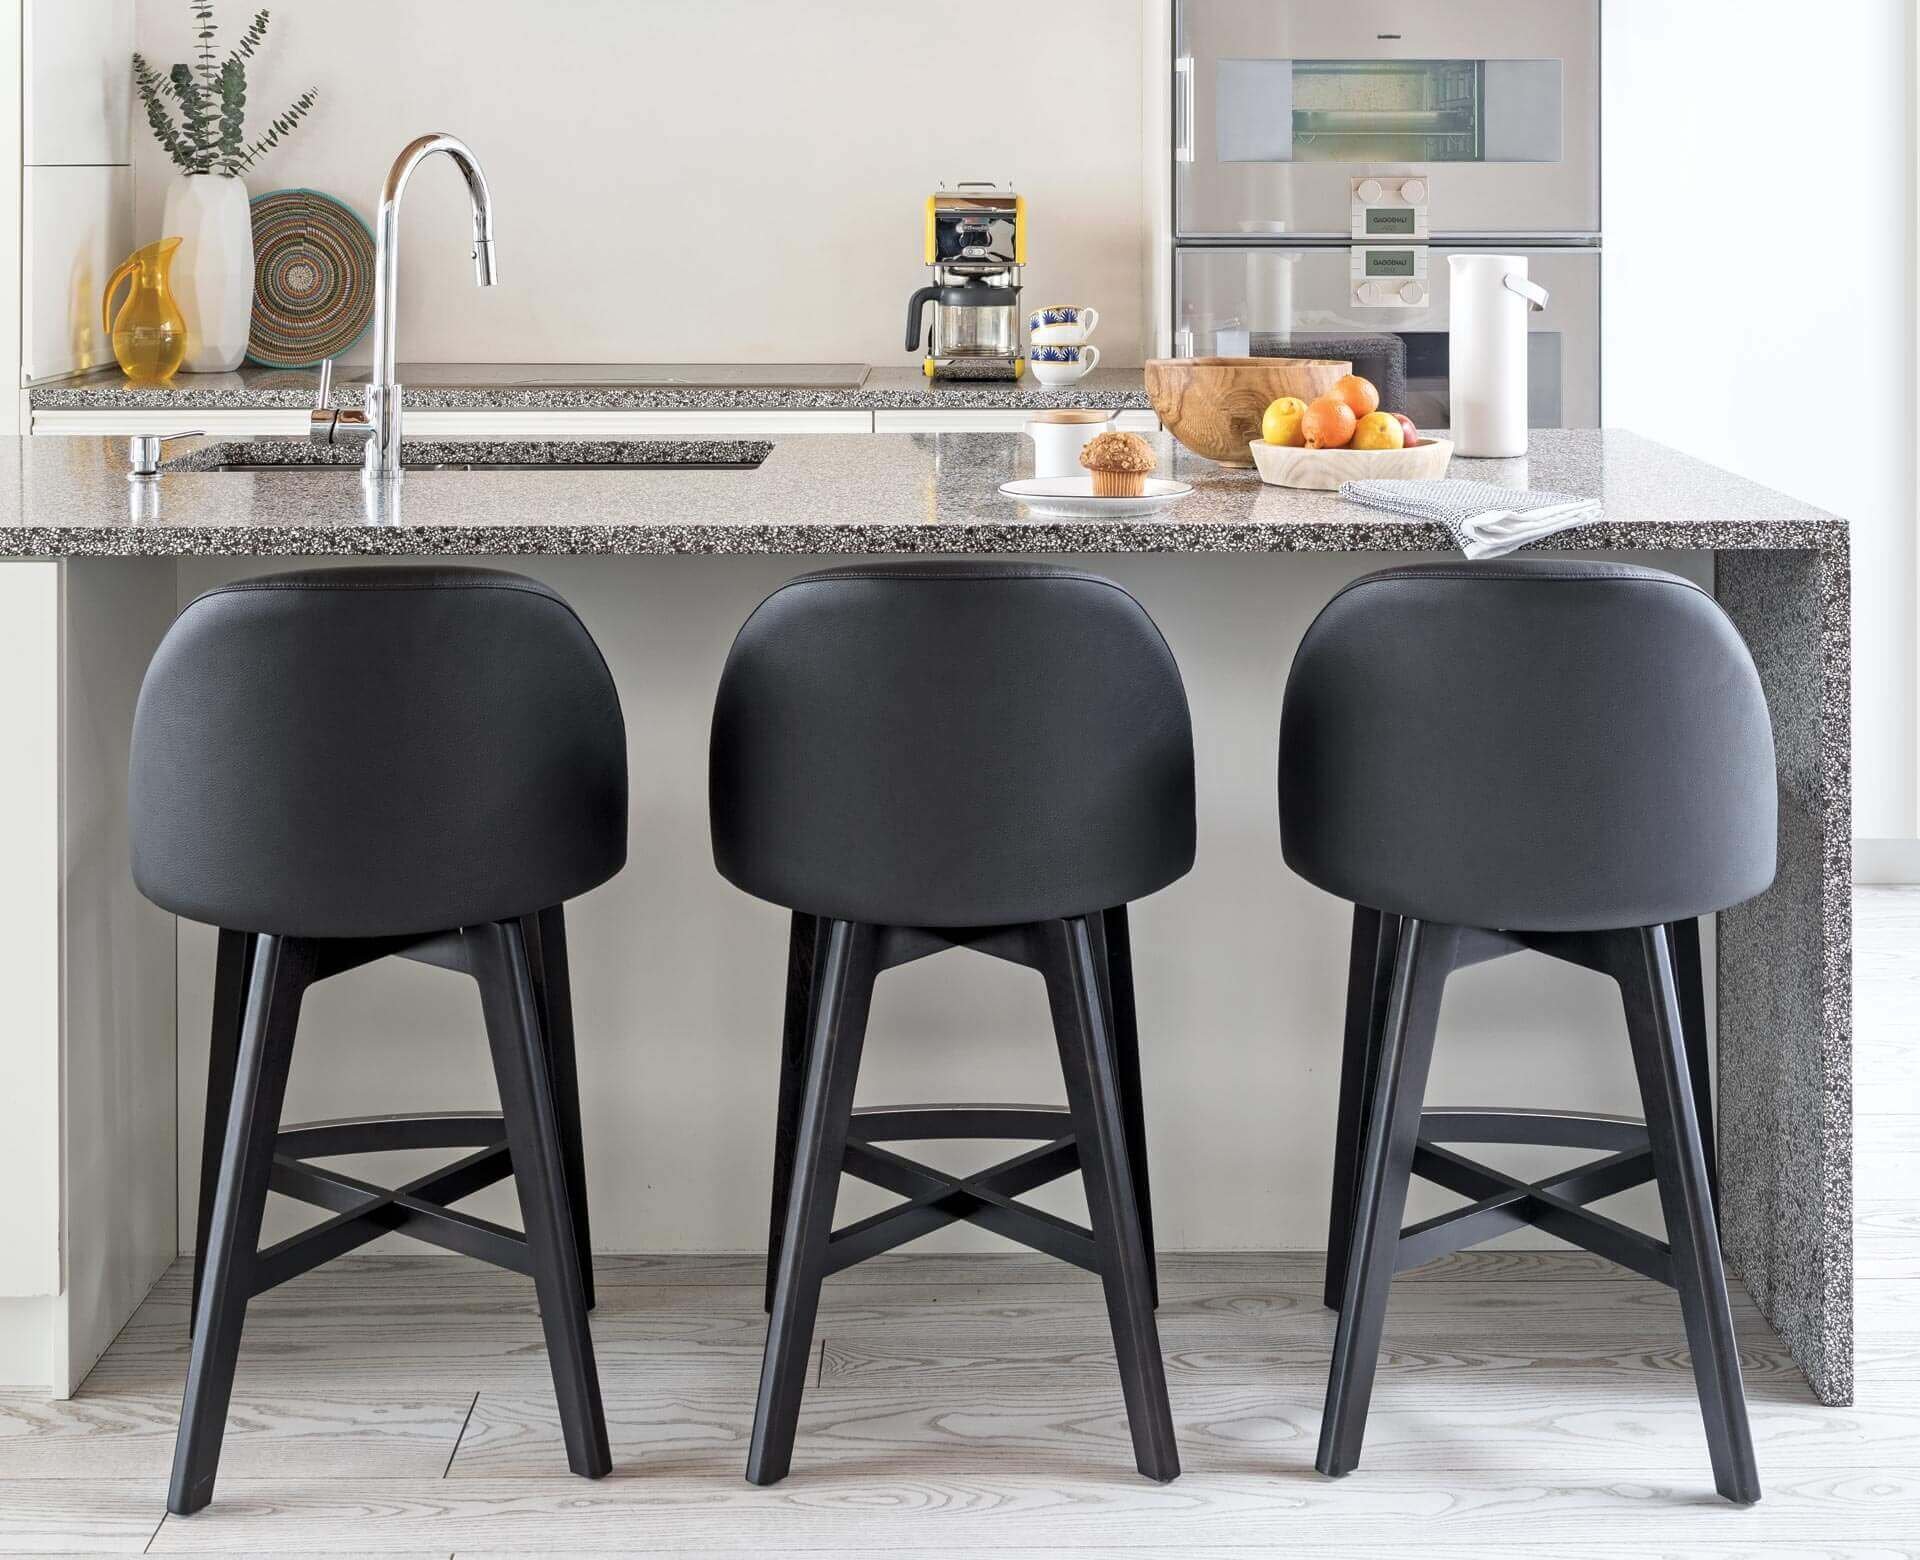 Canadel Barstools Counter Stools West Palm Beach